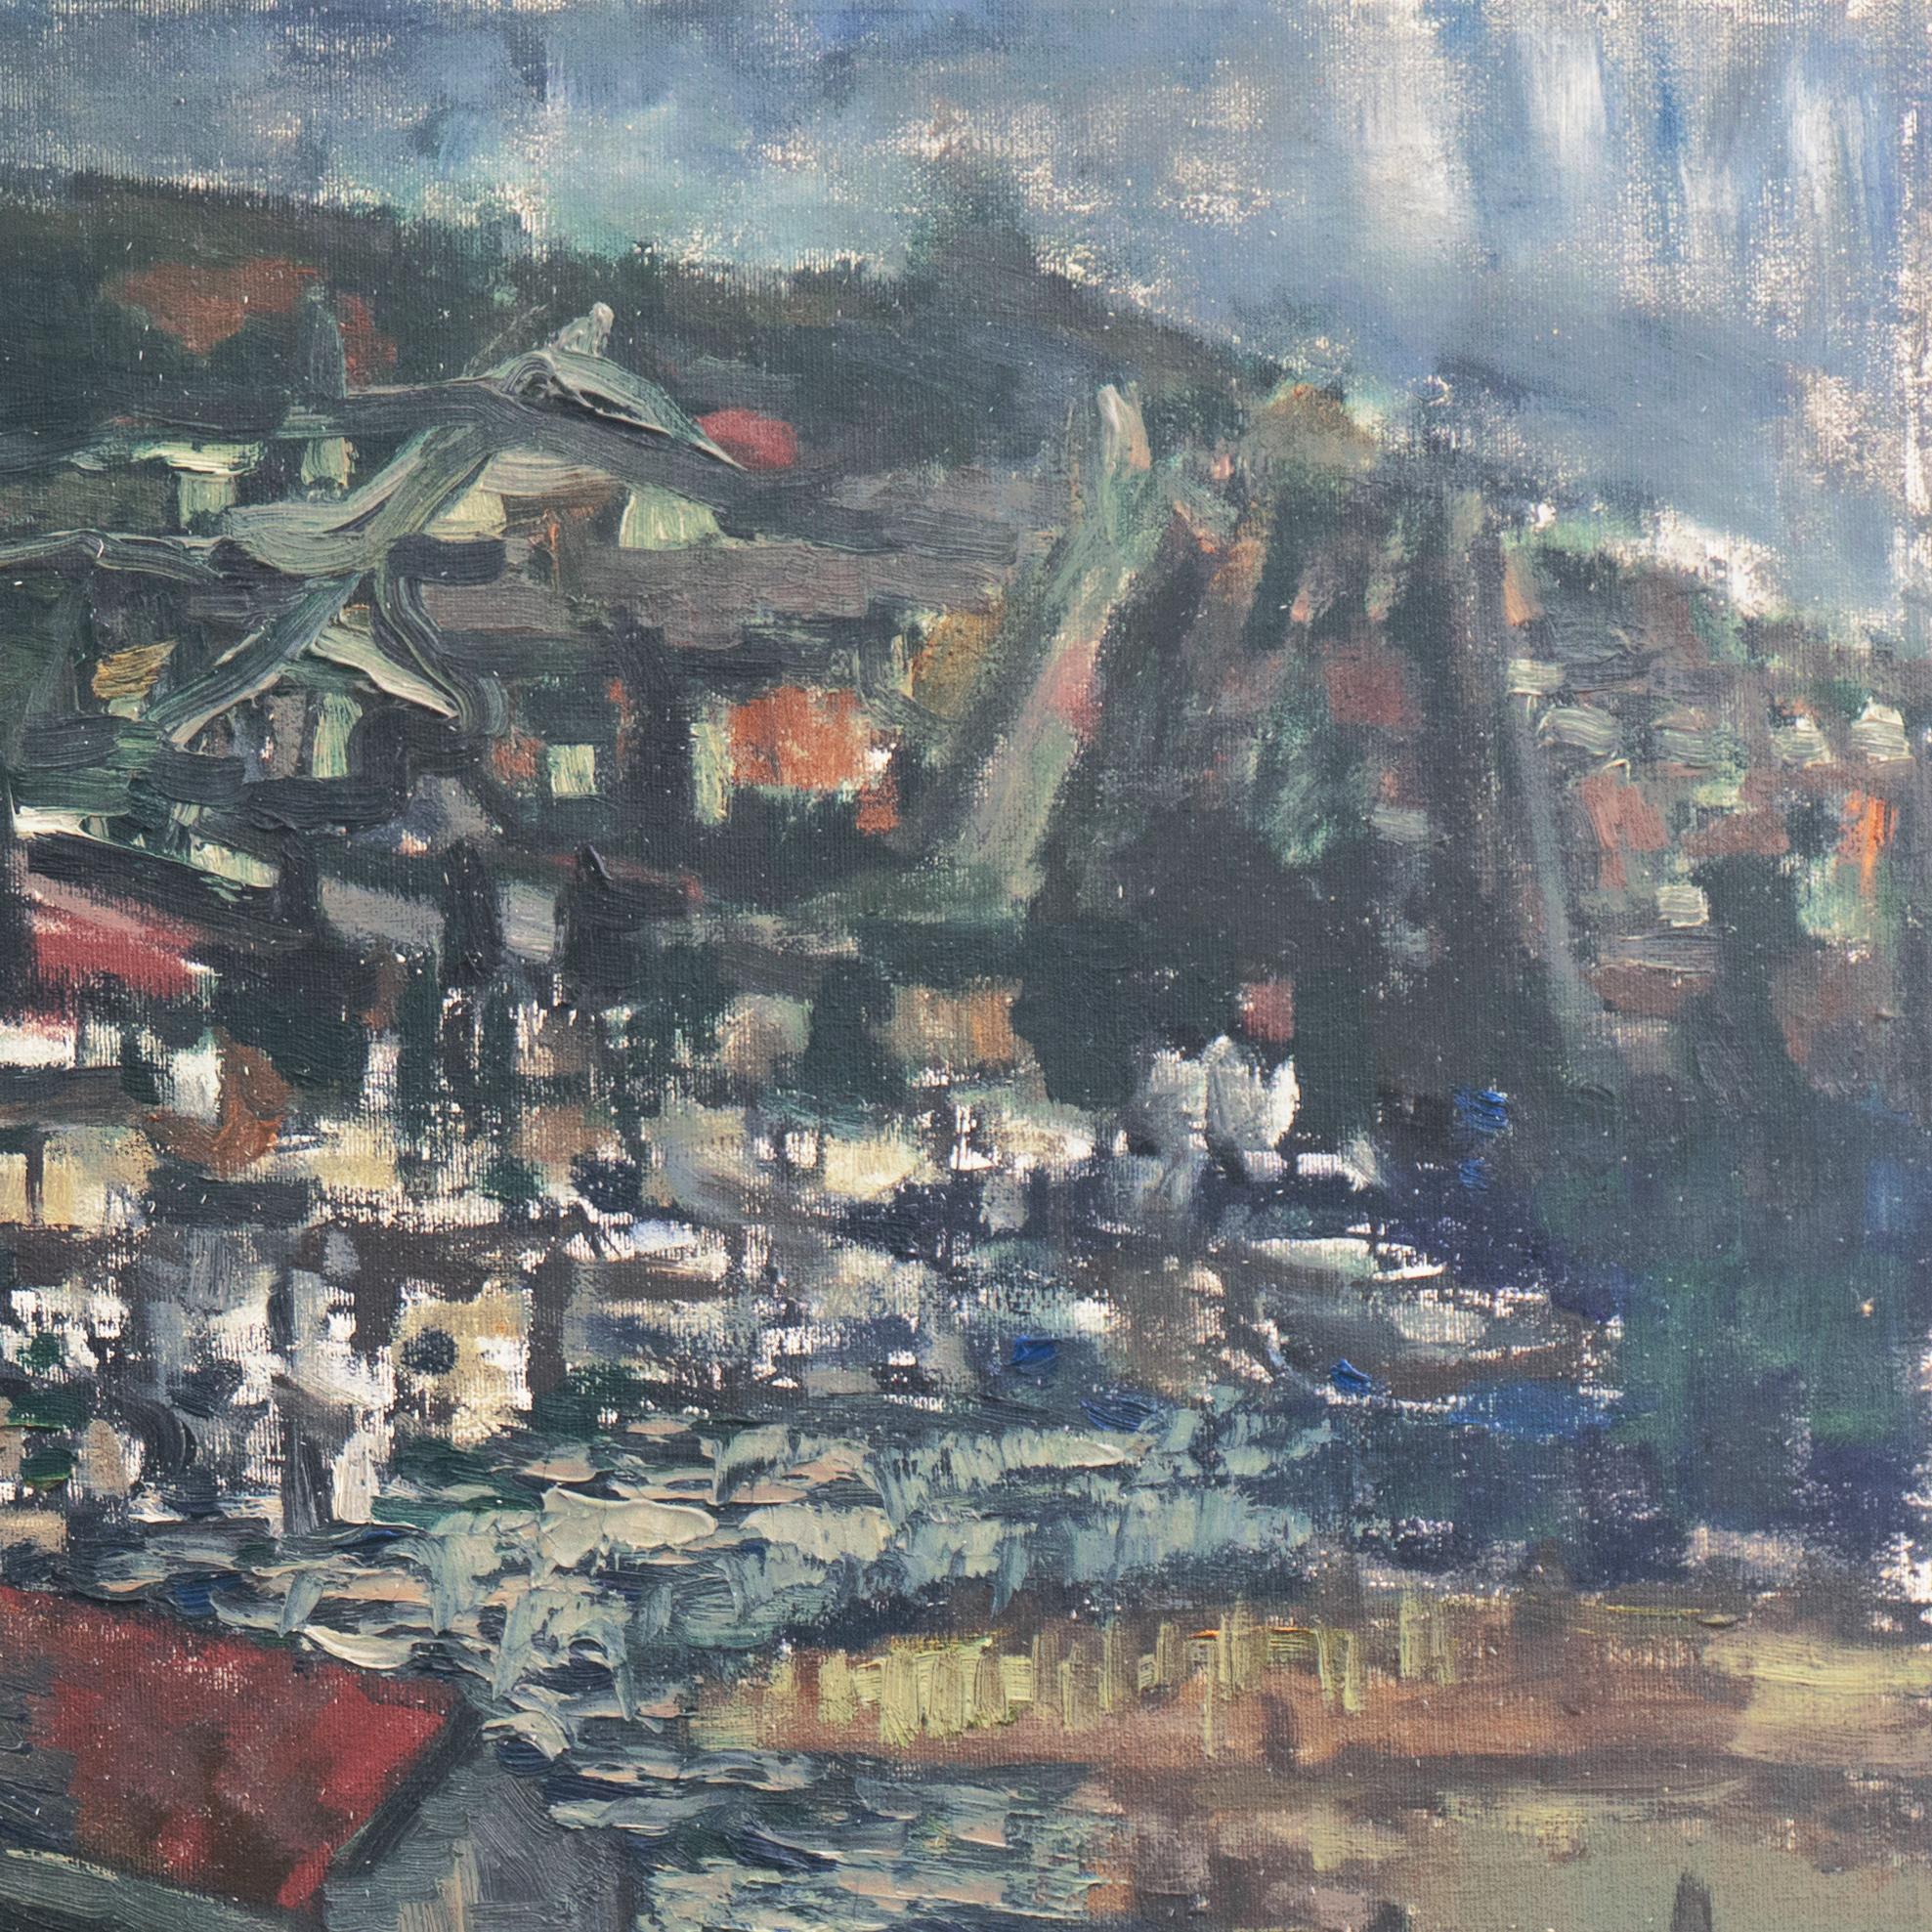 'Evening at the Harbor', Large American Post-Impressionist Oil, Marine Landscape - Expressionist Painting by A.F.